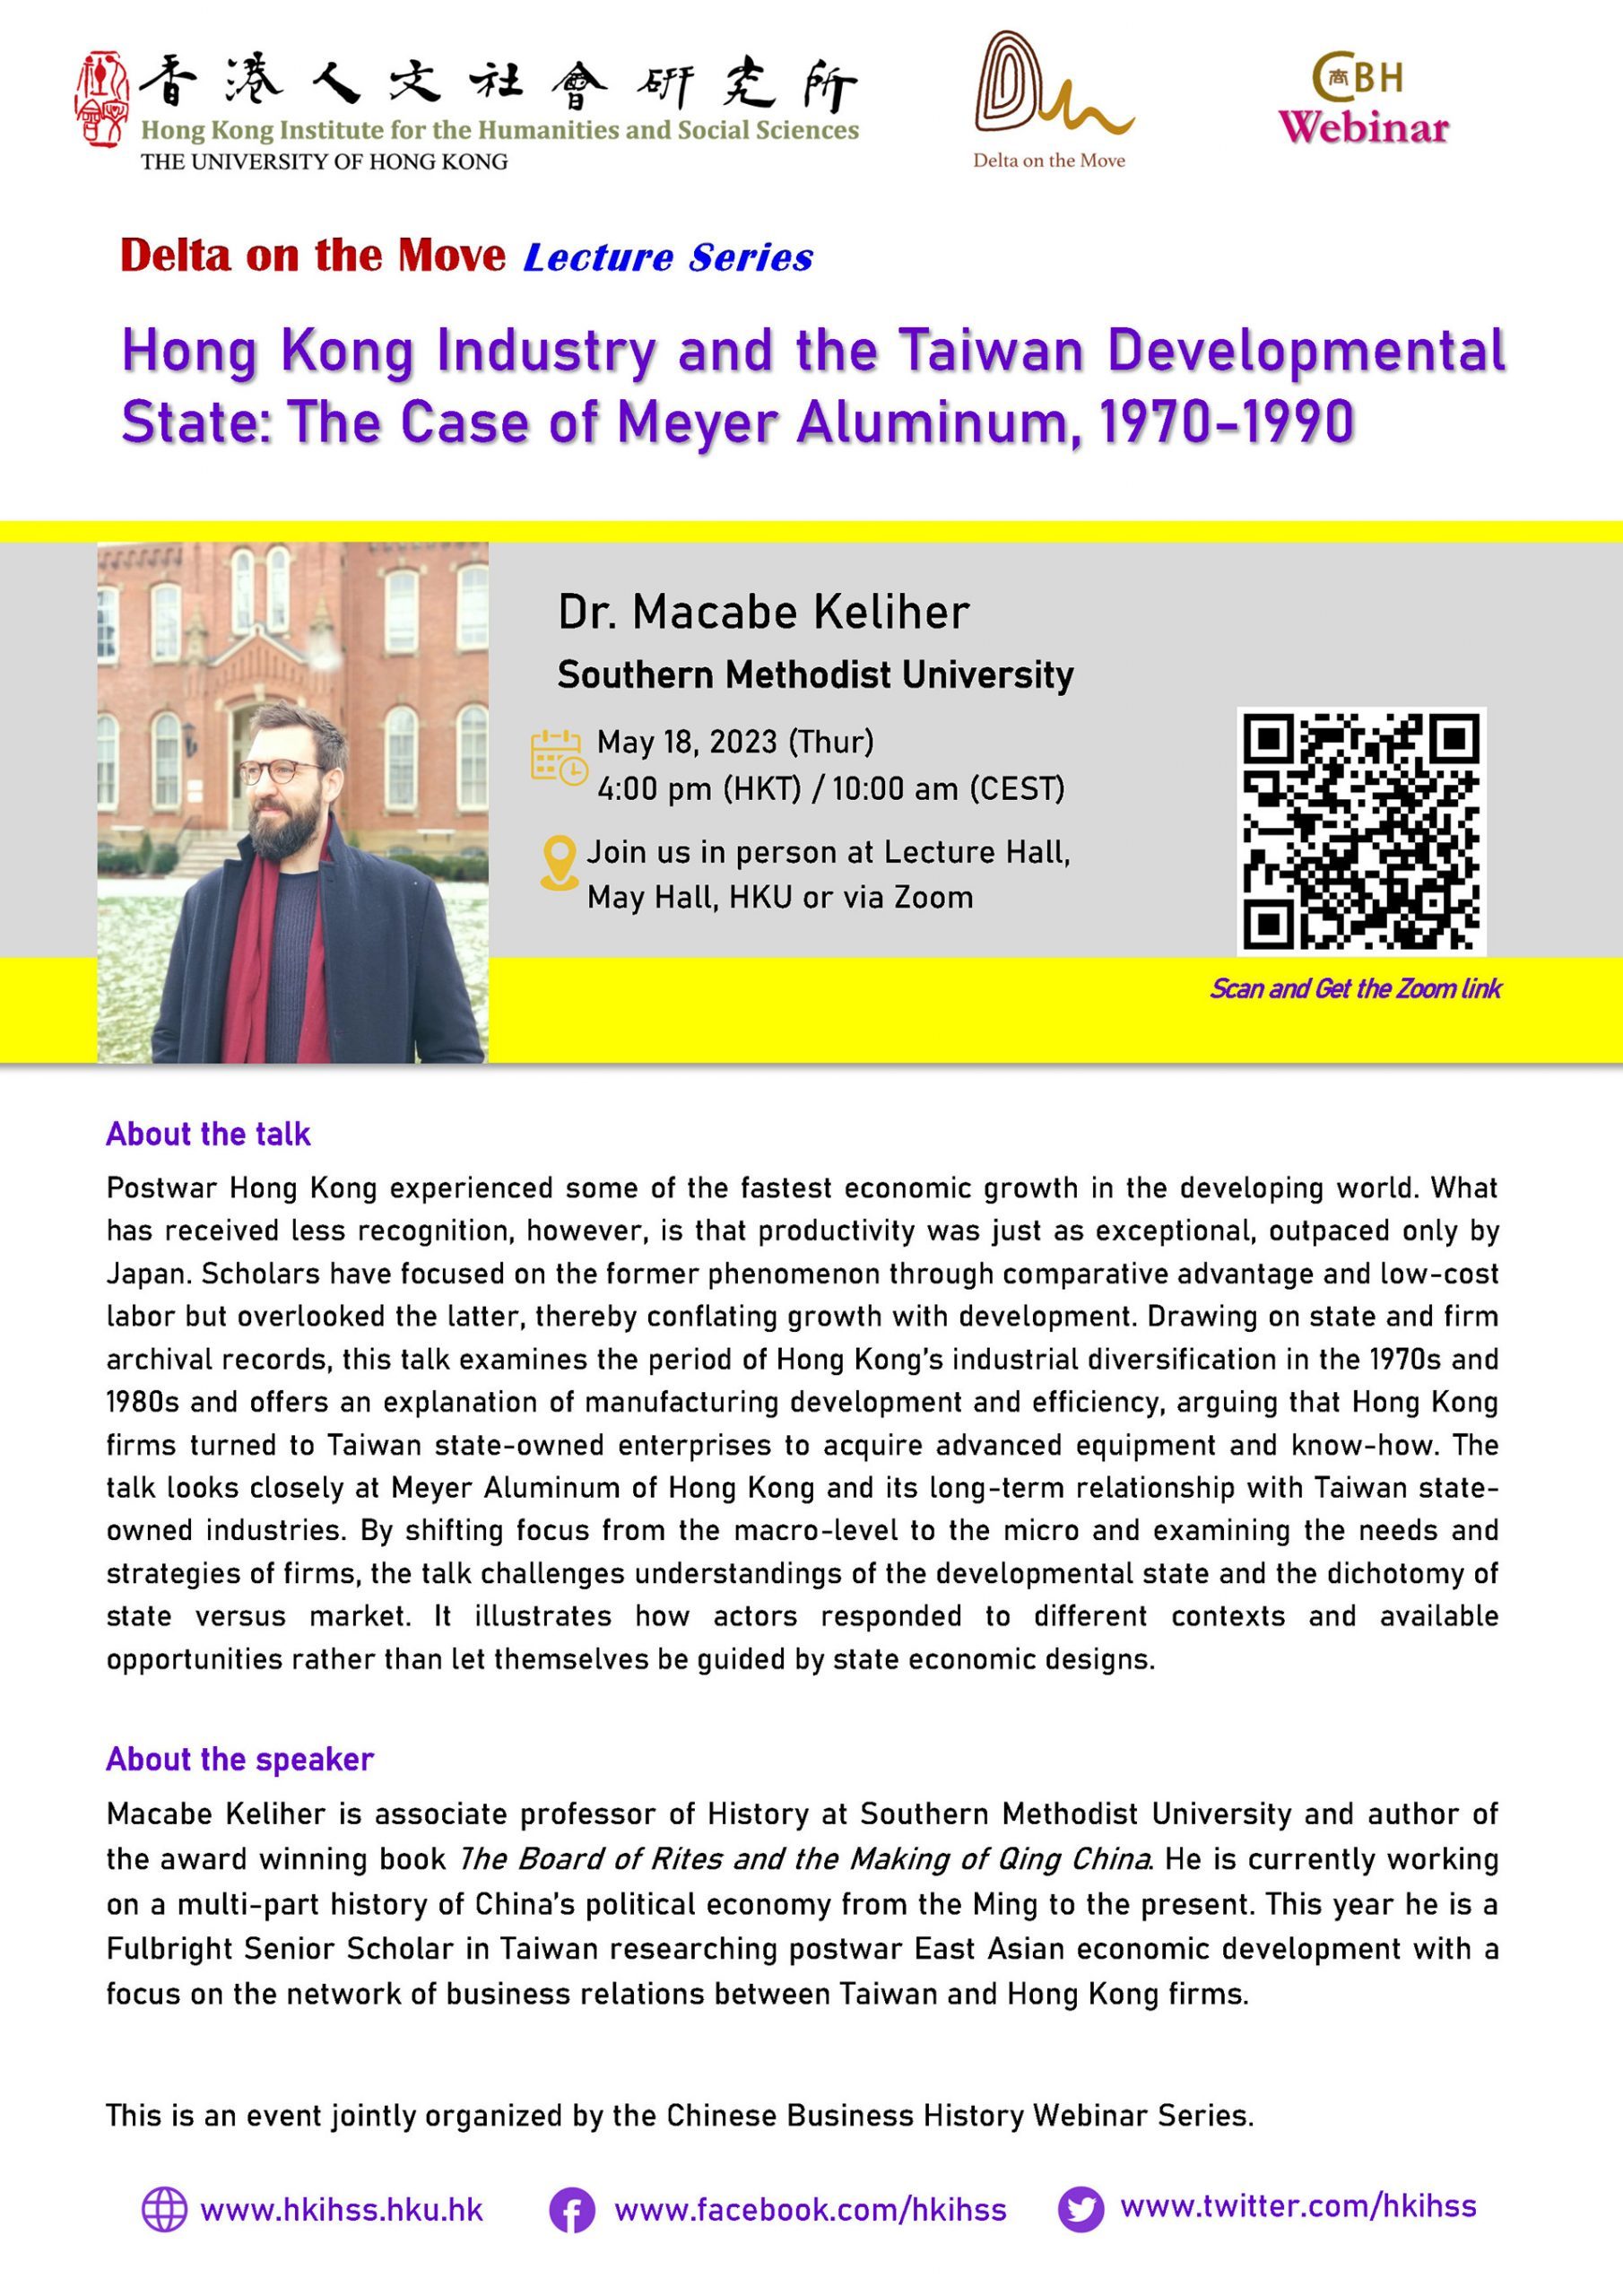 Delta on the Move Lecture Series “Hong Kong Industry and the Taiwan Developmental State: The Case of Meyer Aluminum, 1970 – 1990